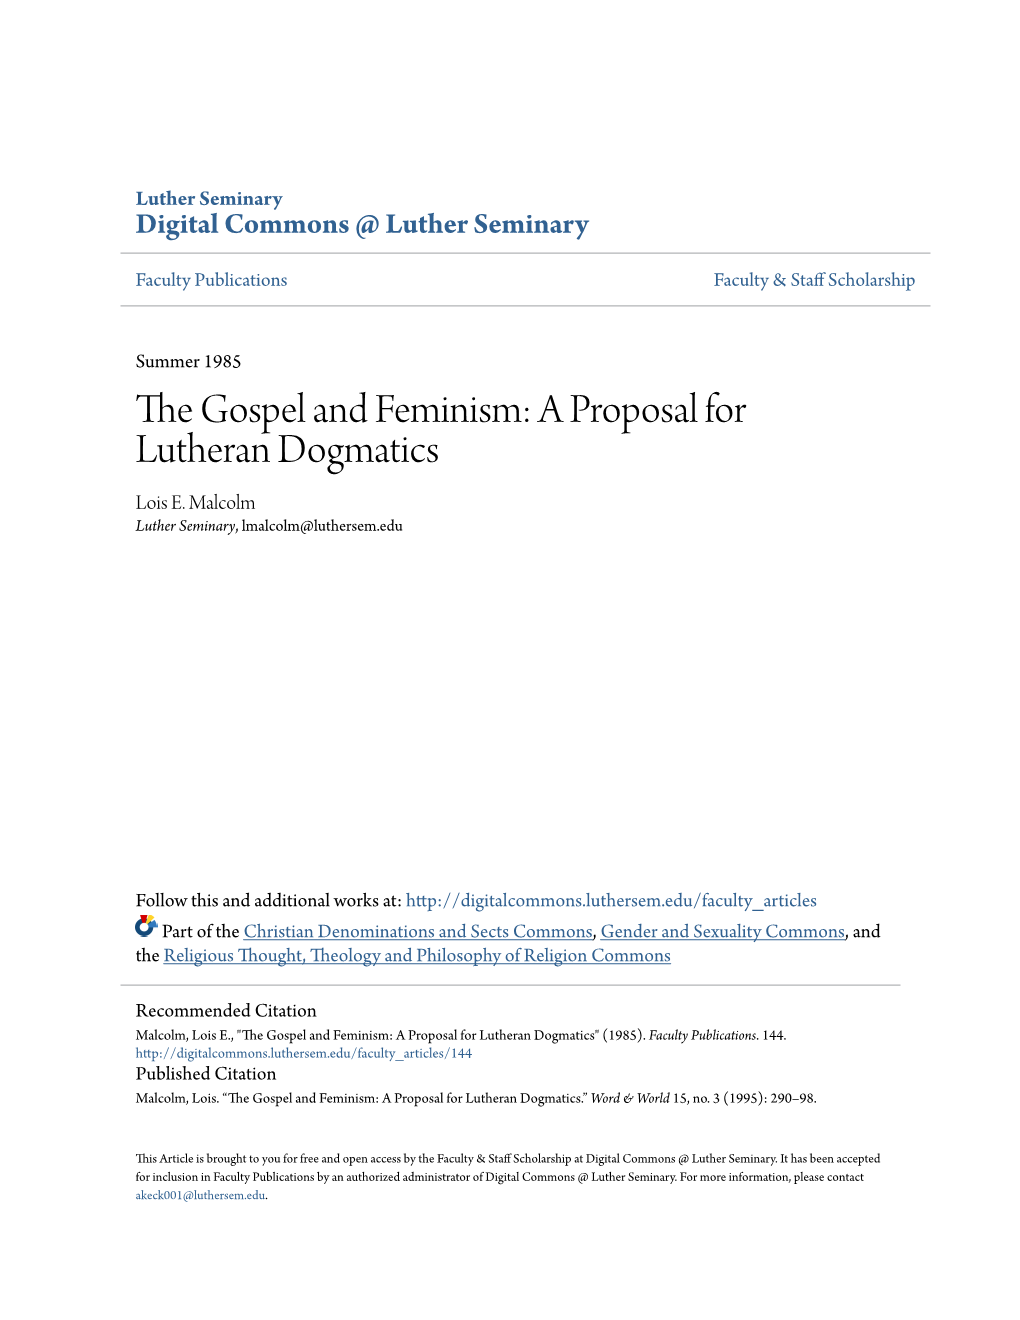 The Gospel and Feminism: a Proposal for Lutheran Dogmatics Lois E